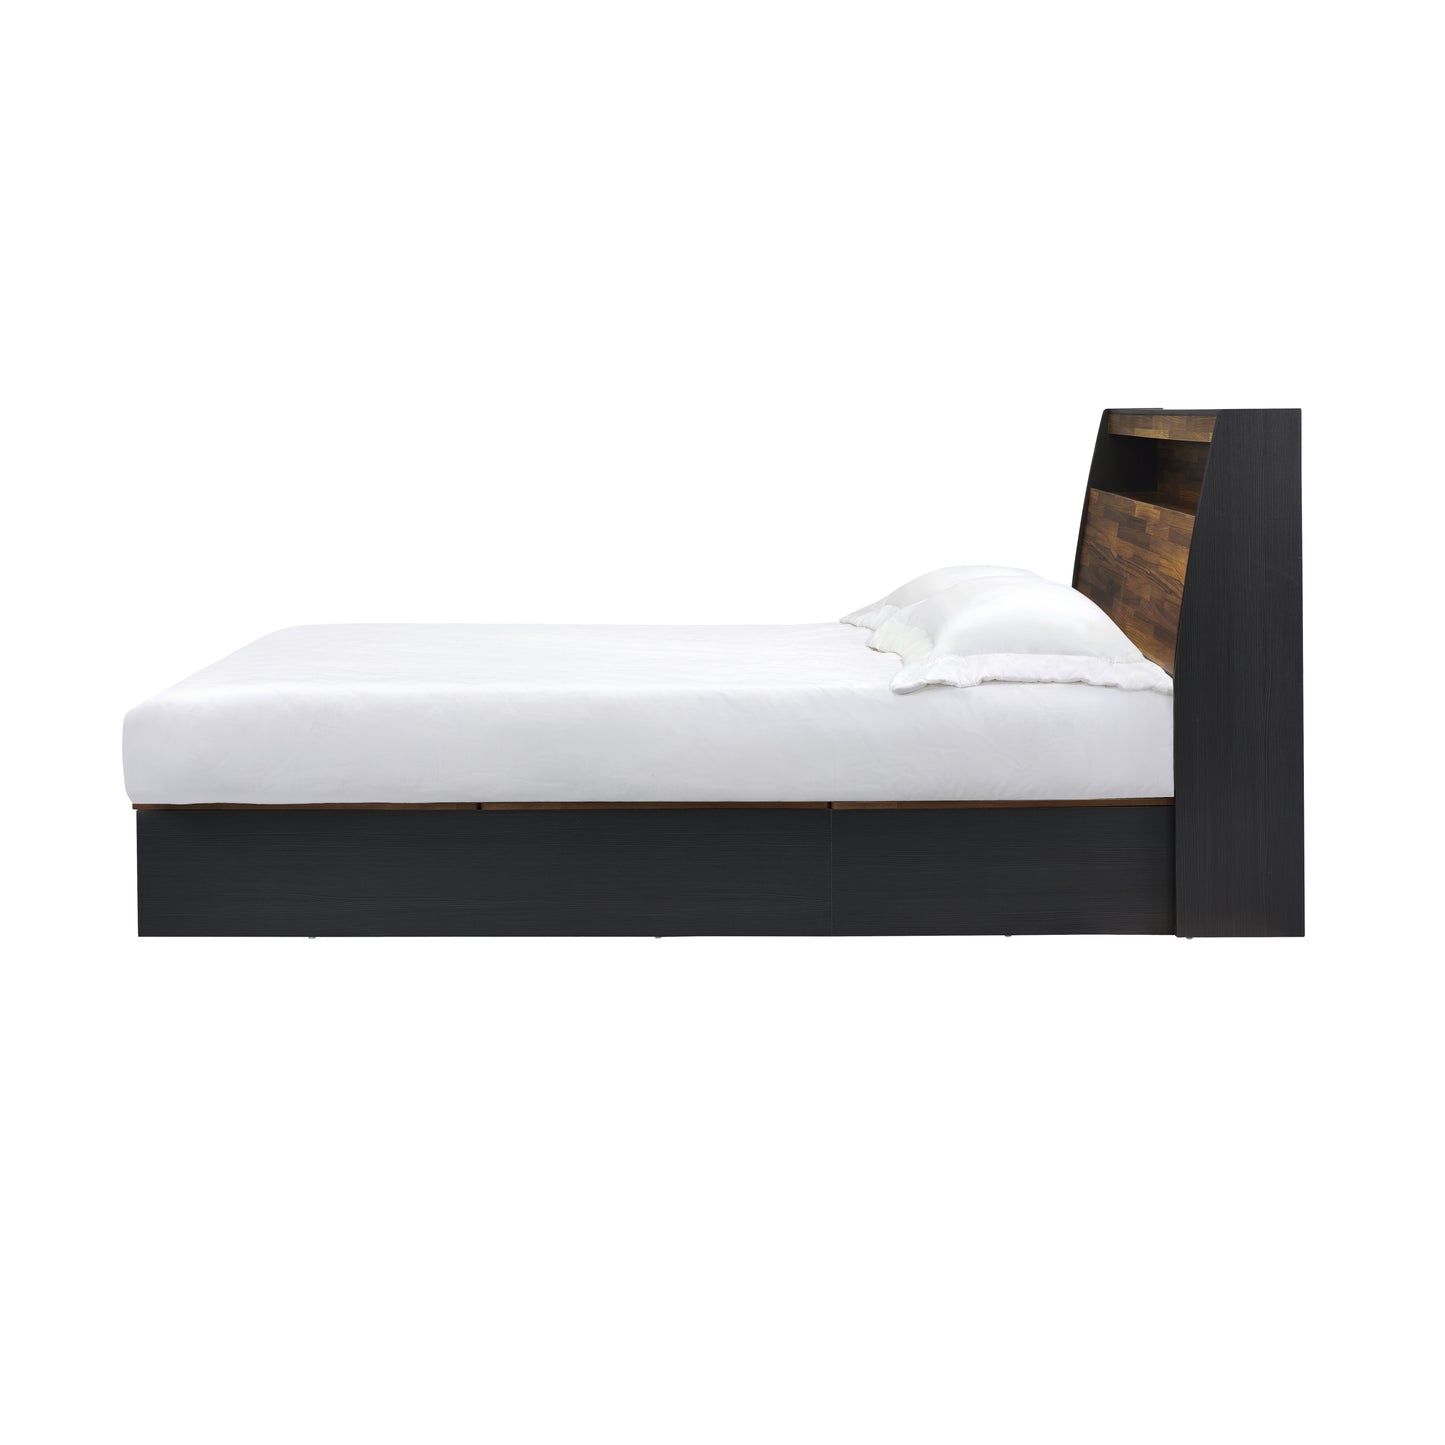 ACME Eos Queen Bed in Walnut & Black Finish BD00545Q